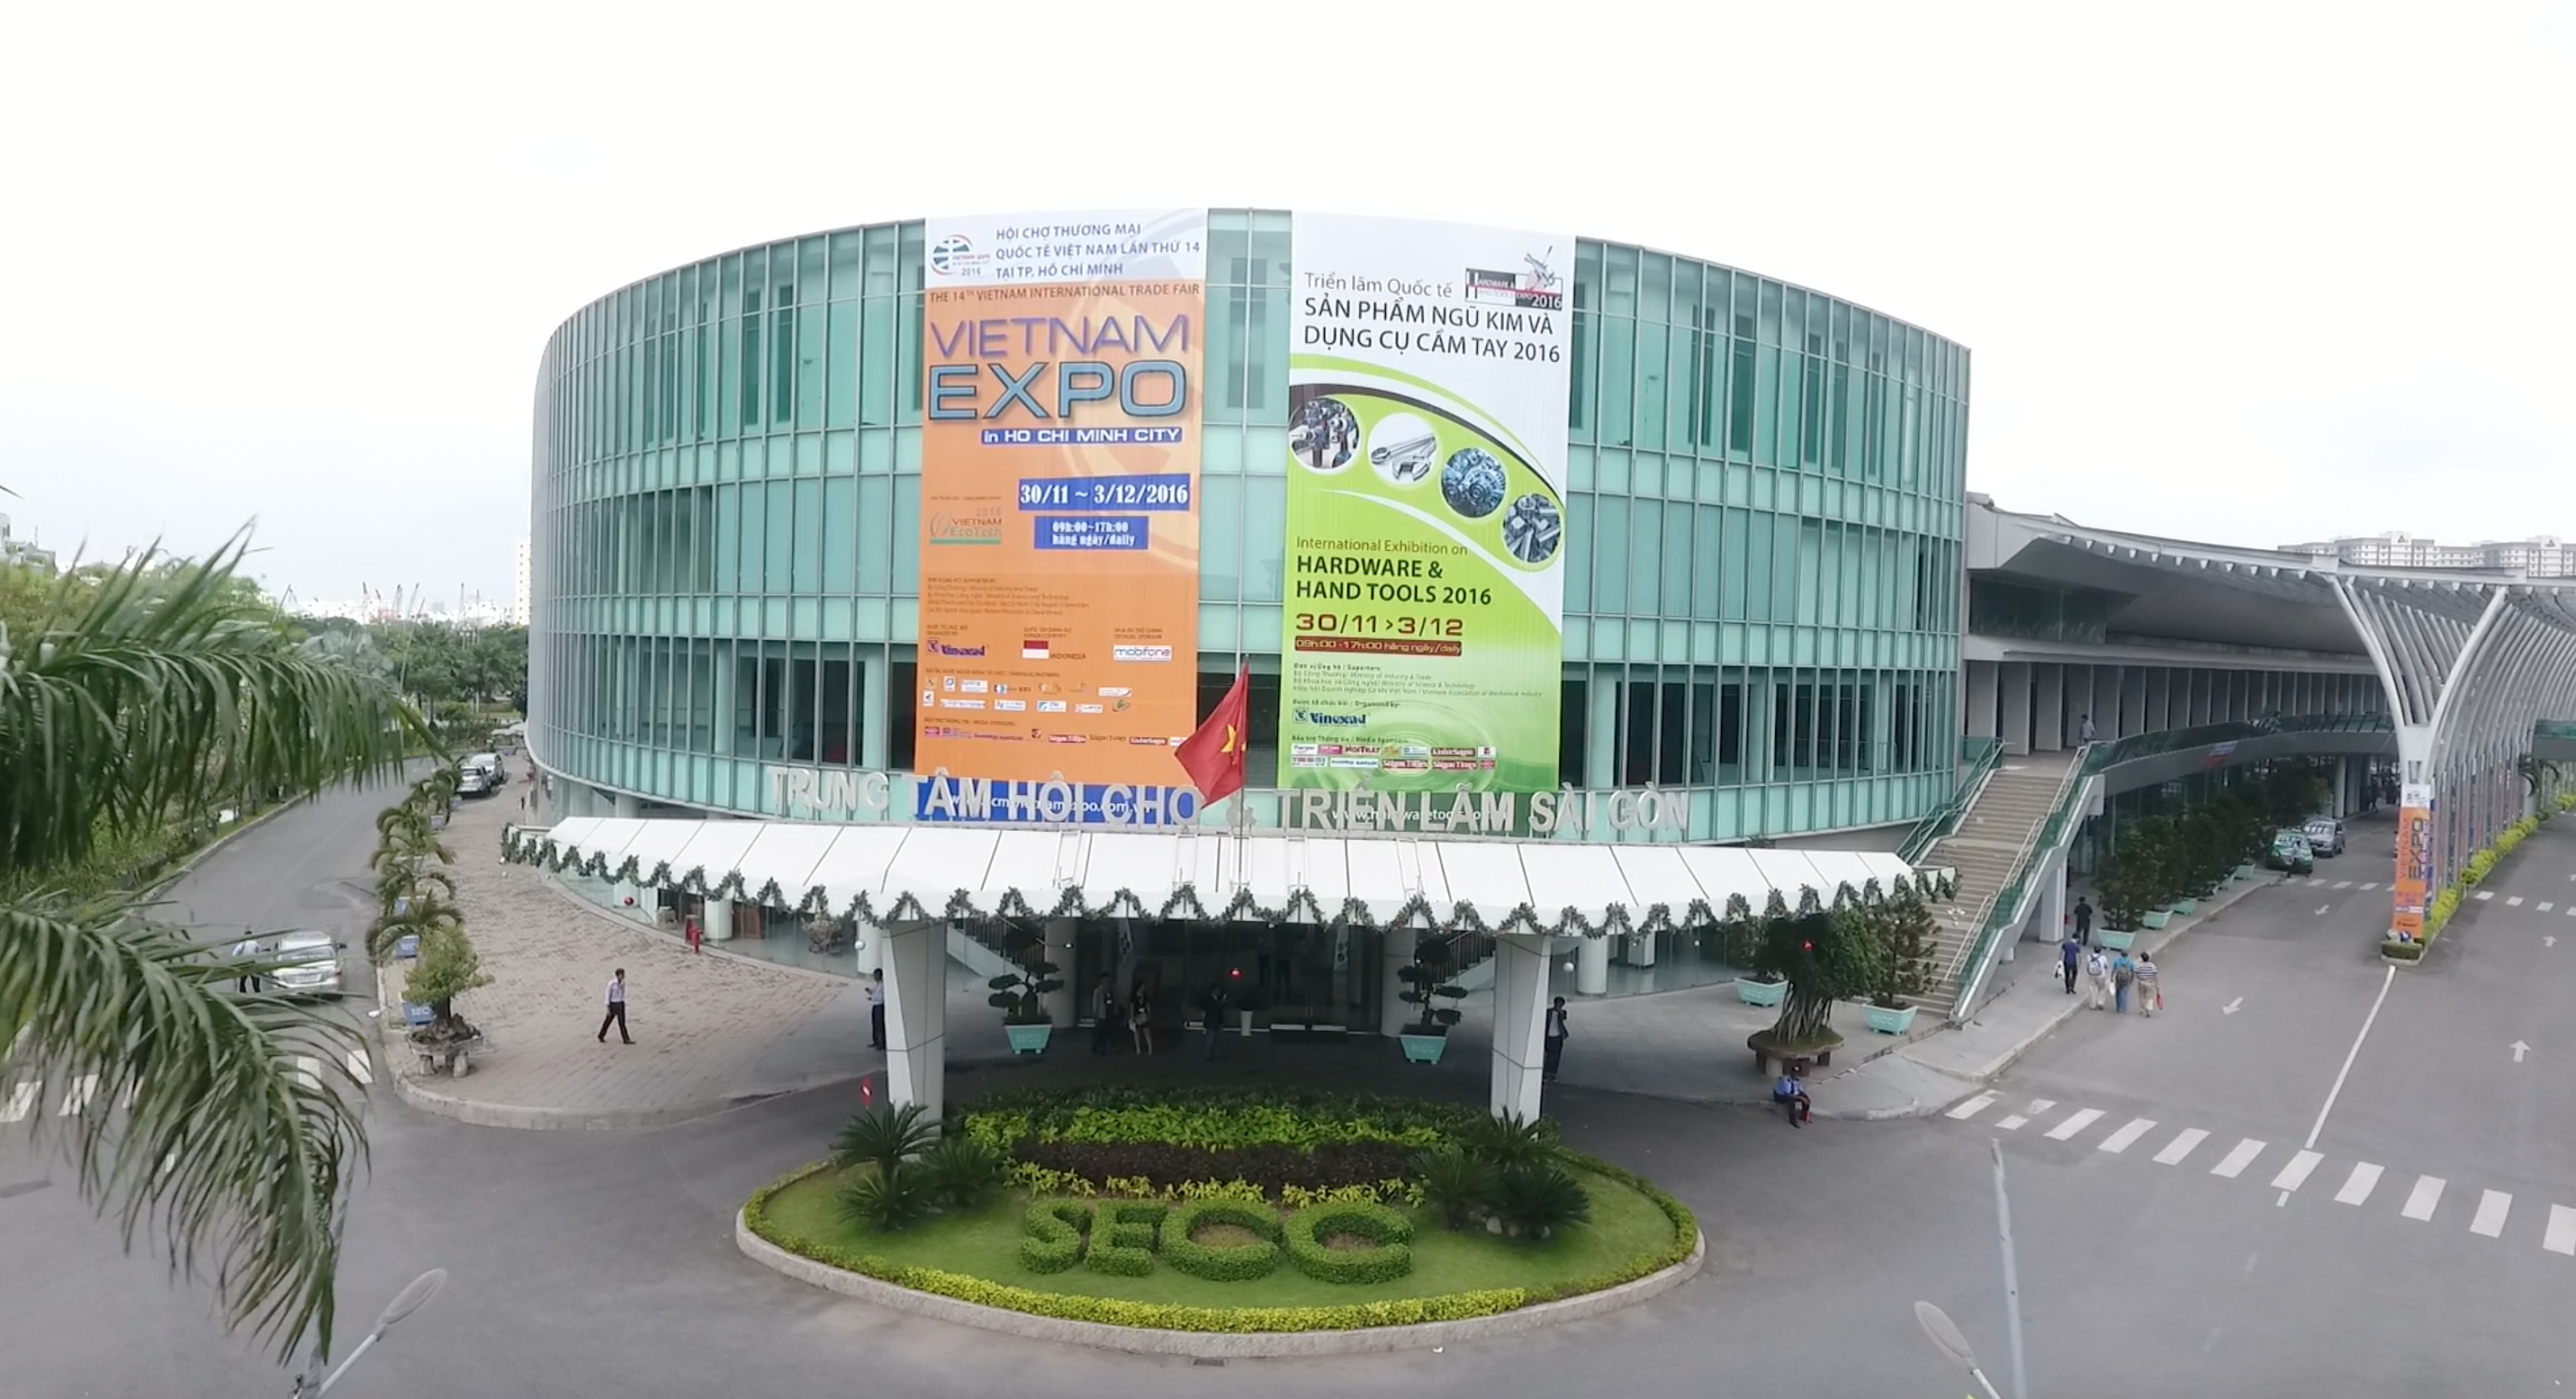 vietnam expo 2017 the land of business opportunities